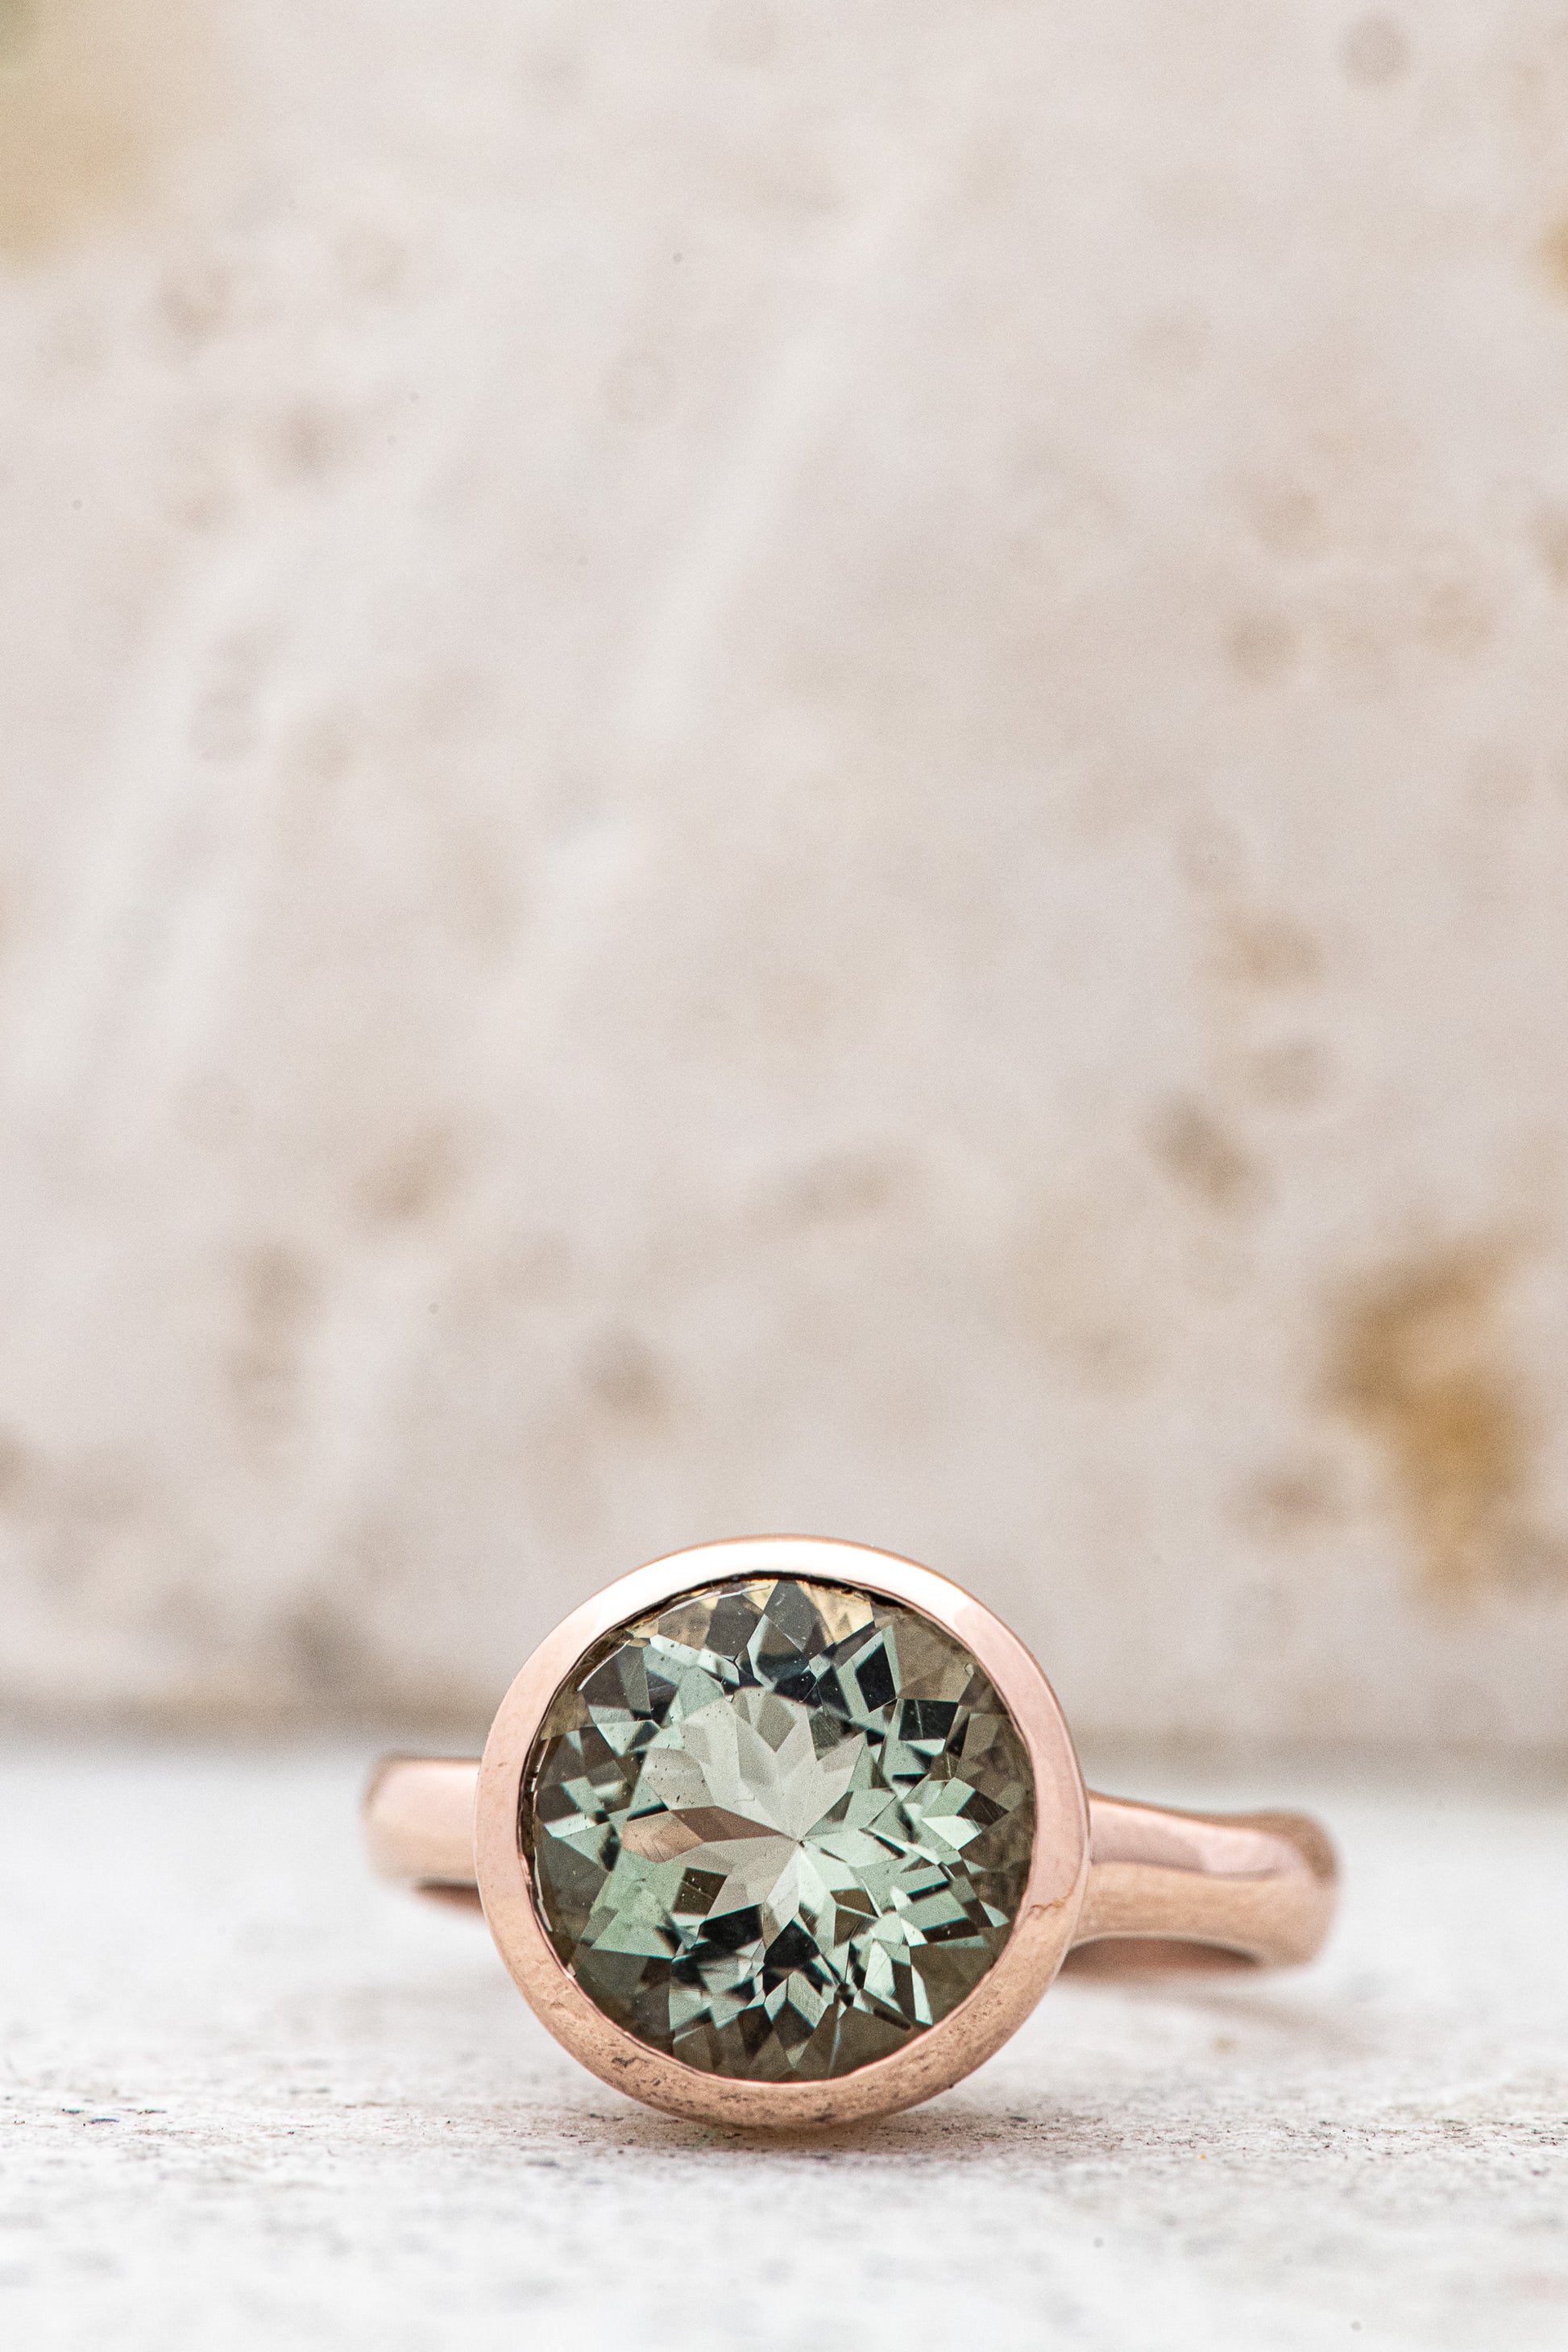 A Round Green Amethyst Ring, in Rose Gold with a green amethyst stone, handmade by Cassin Jewelry.